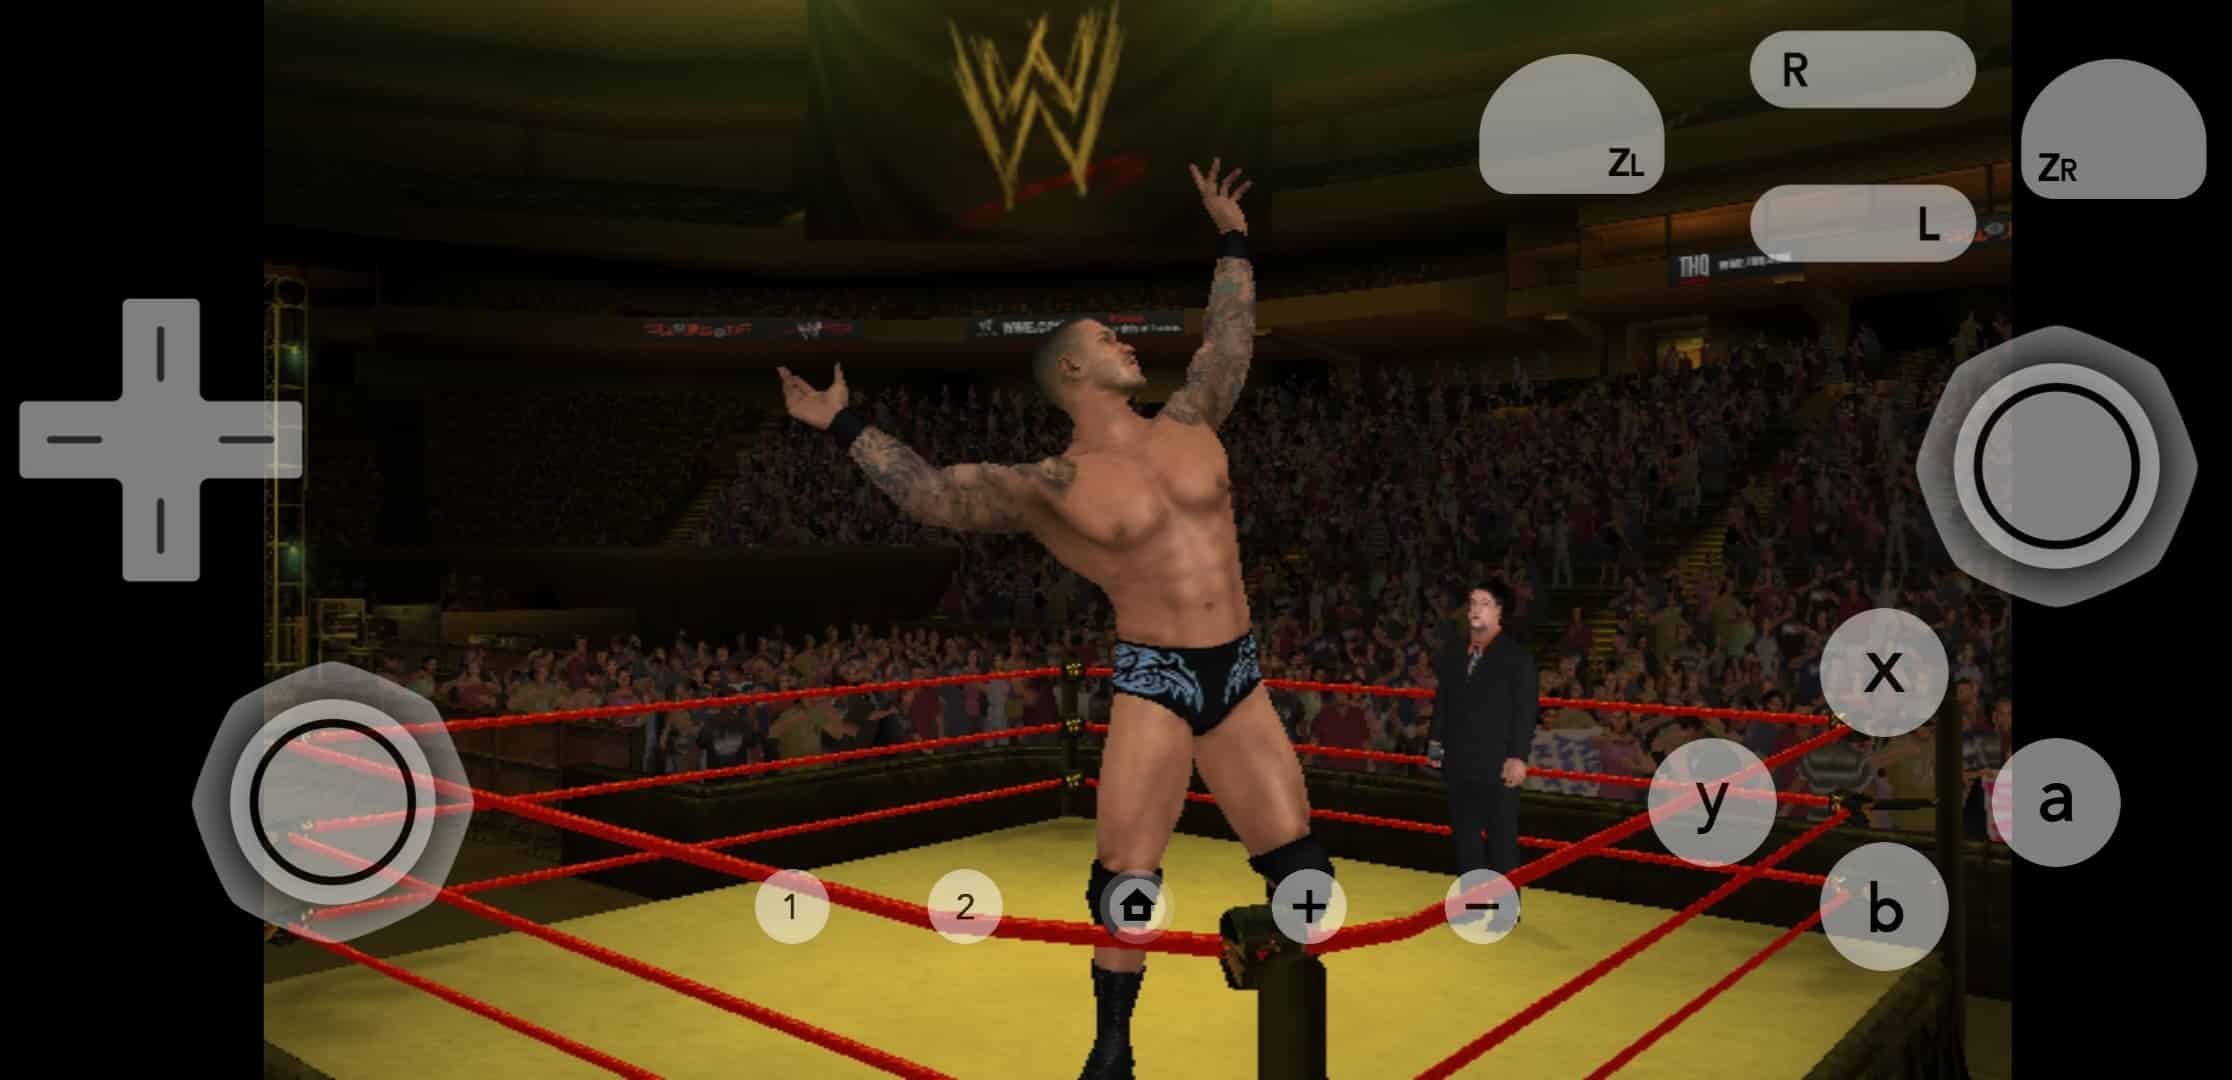 2k13 wwe download for pc full version